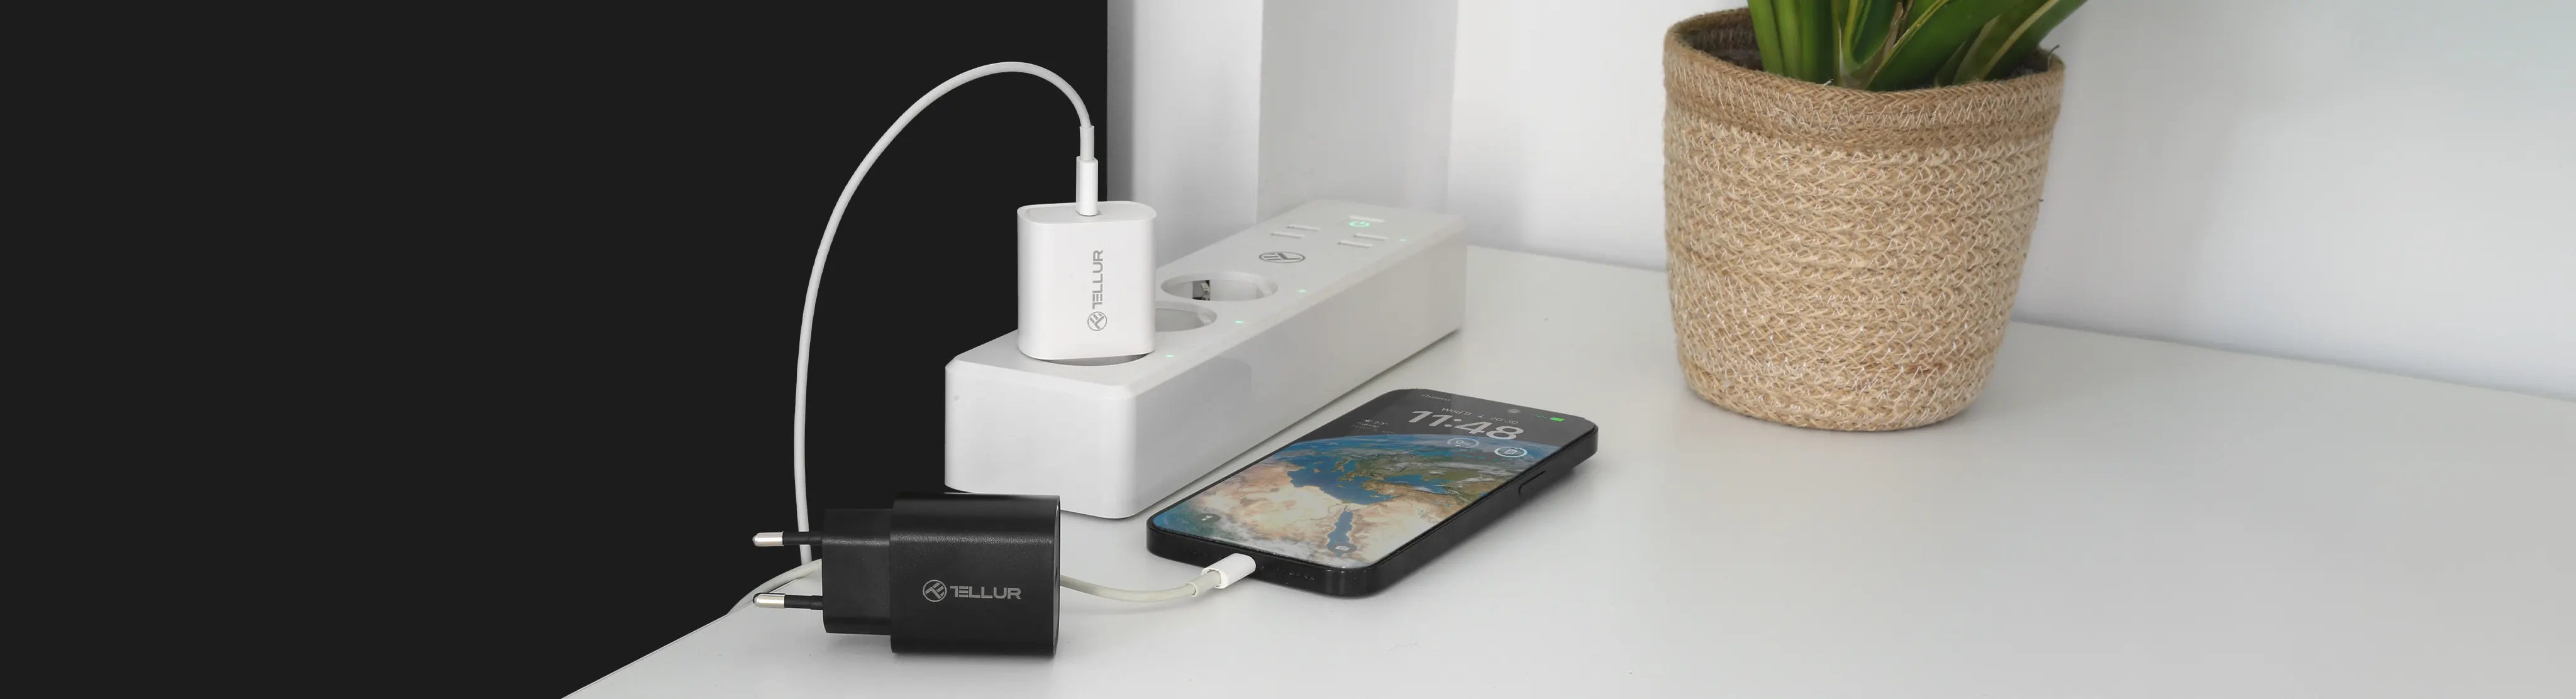 Discover Tellur's selection of Wall Chargers, featuring sleek designs with fast-charging PD and QC3.0 technology for all your devices